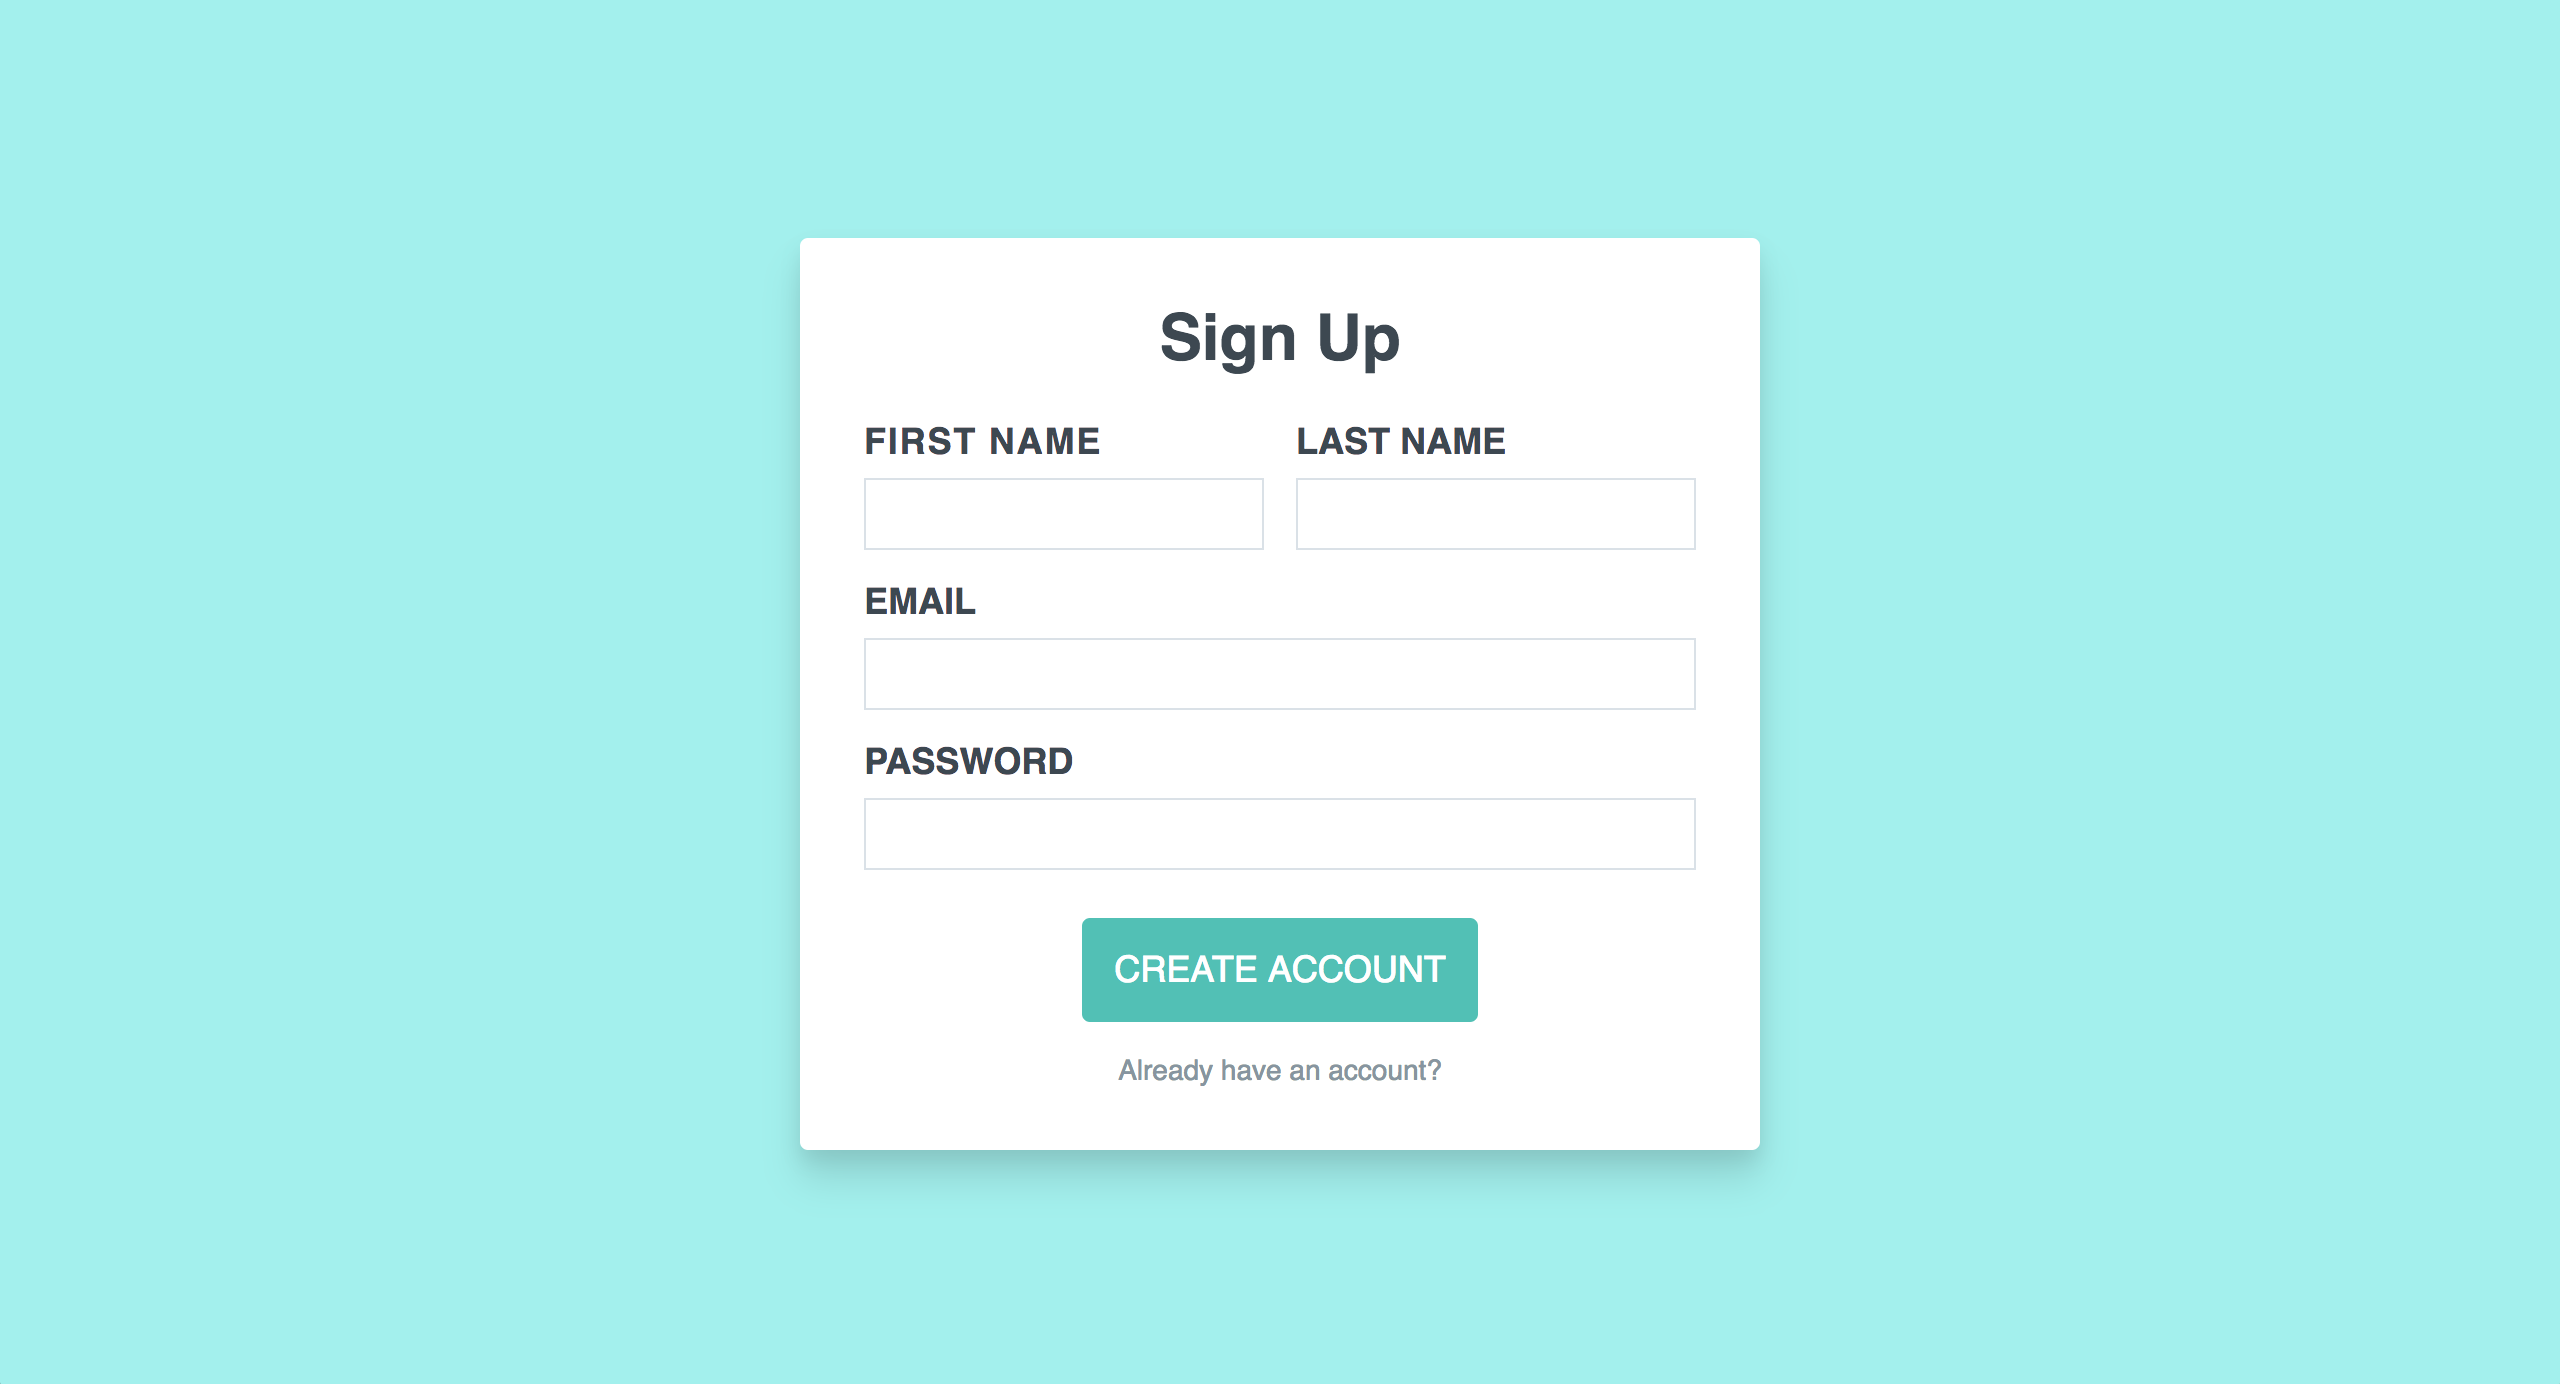 How to Style a Form With Tailwind CSS | CSS-Tricks